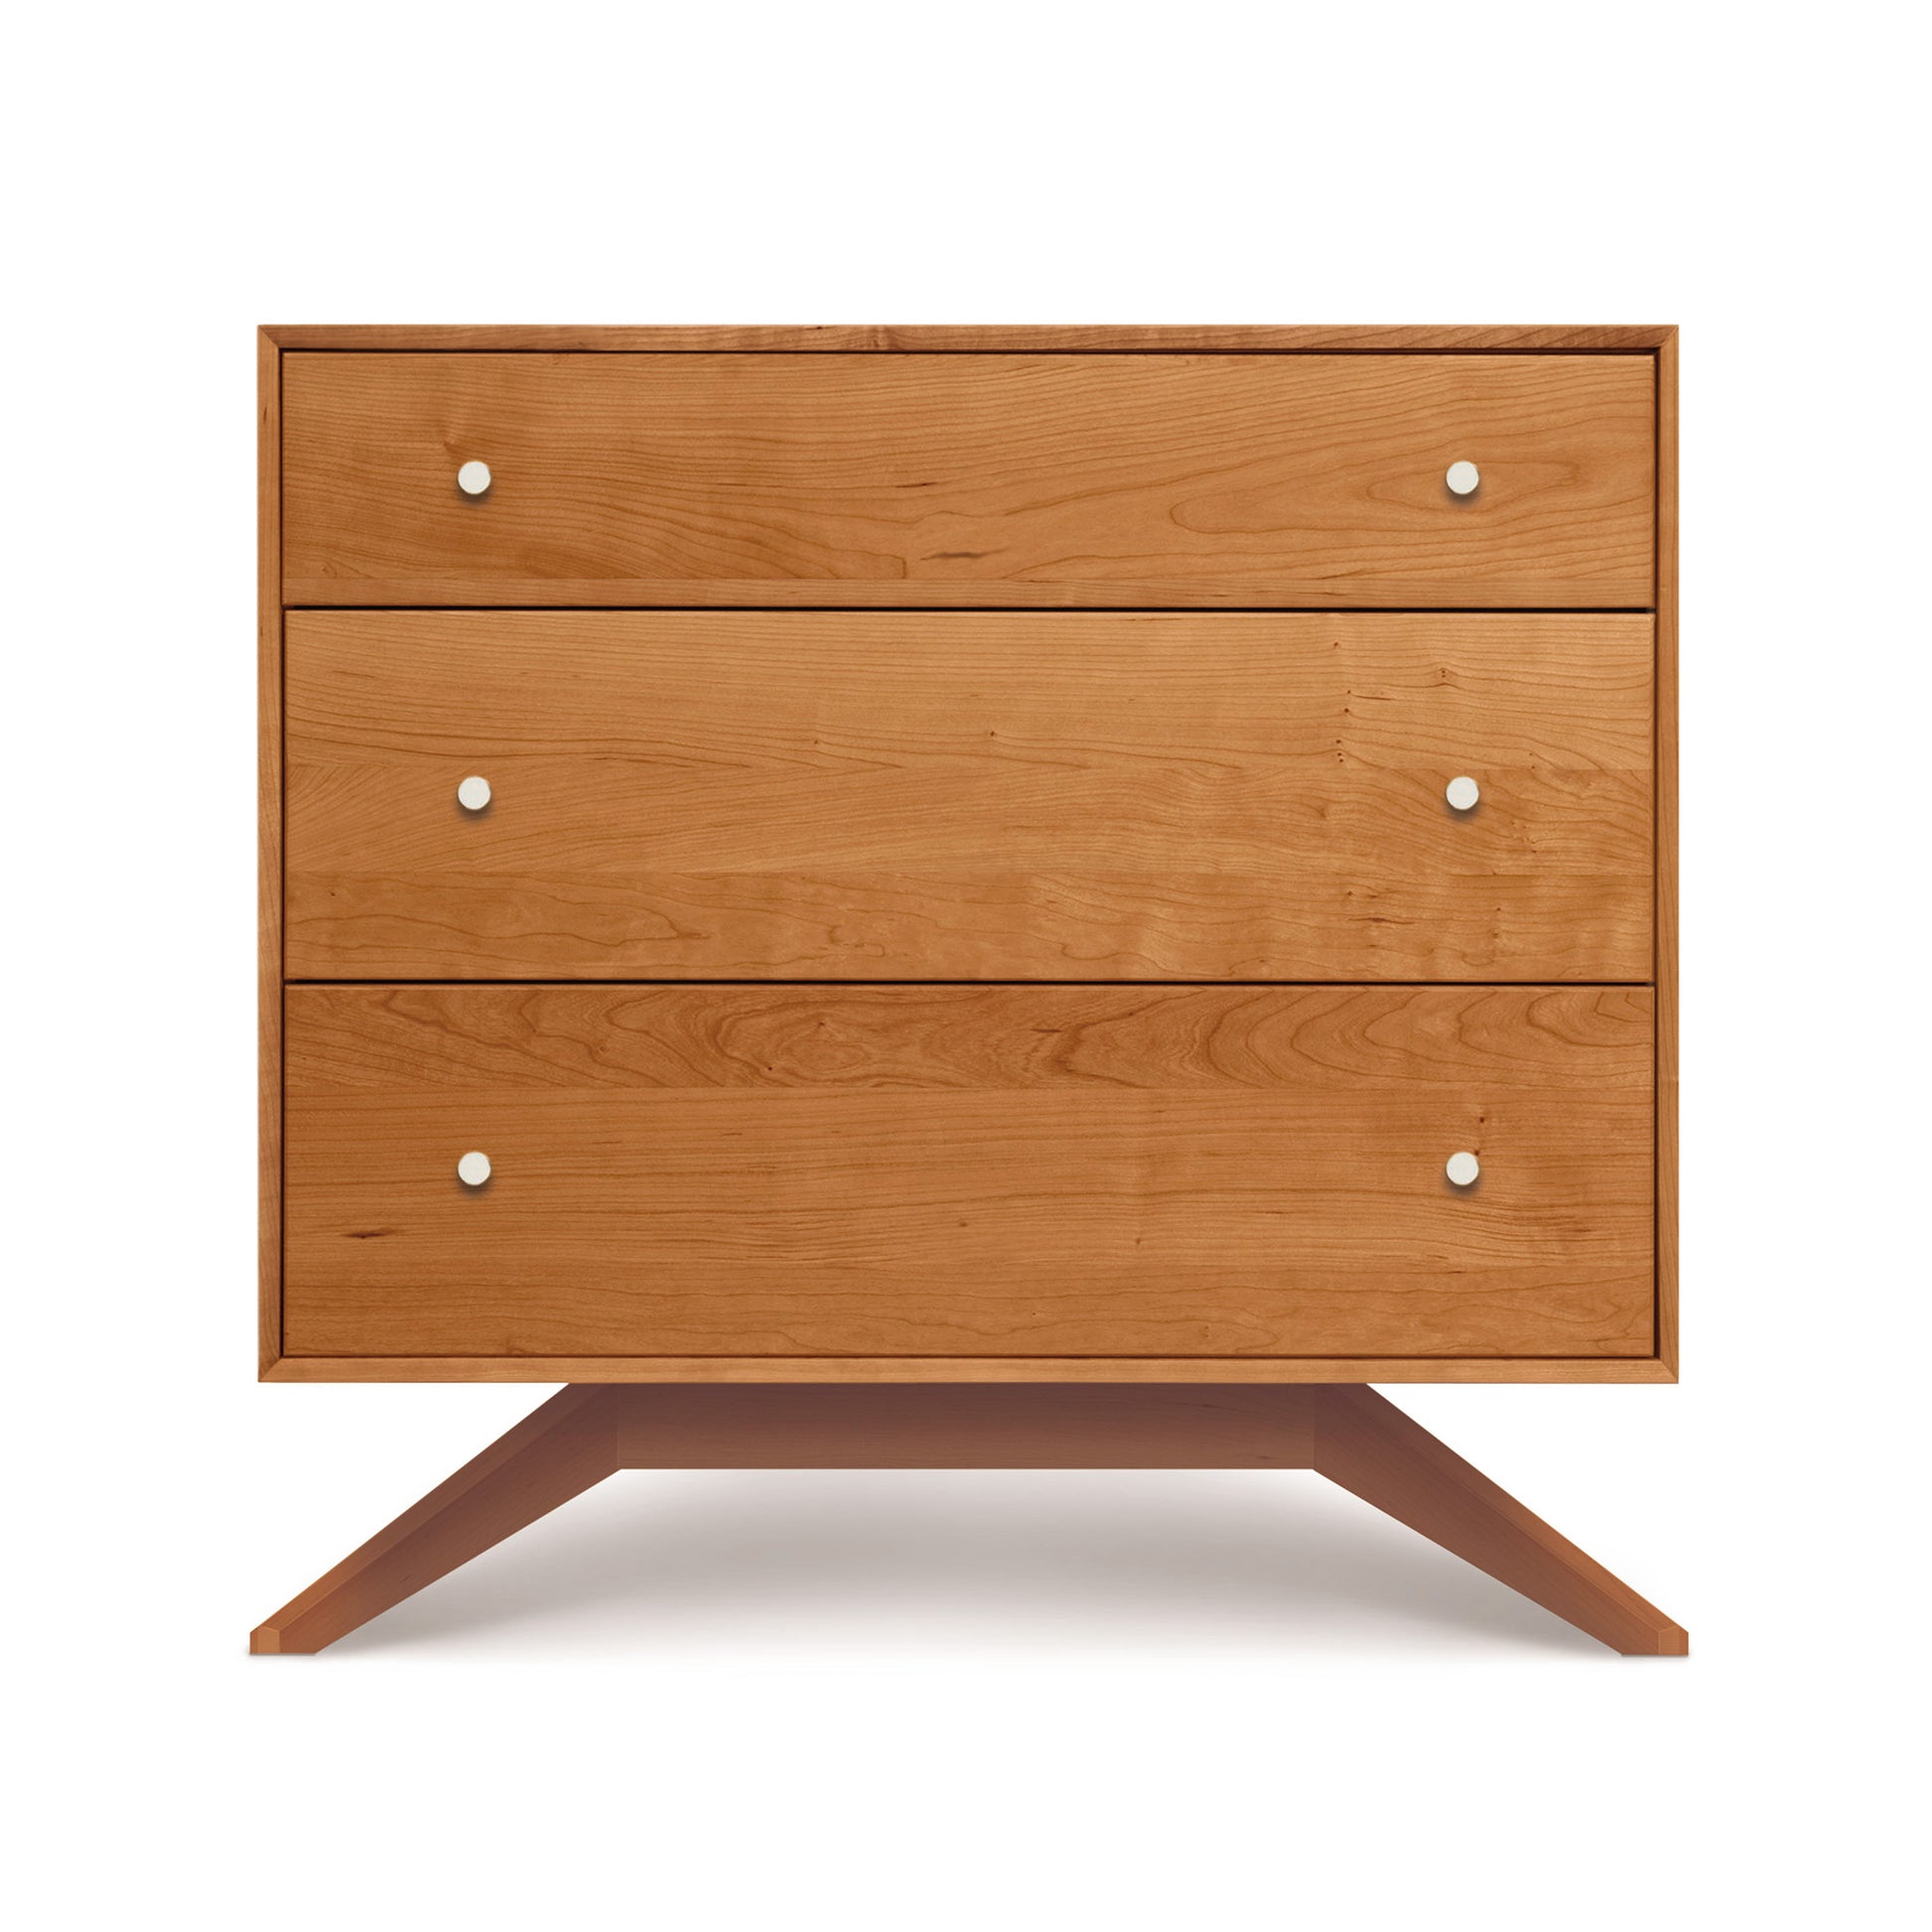 A Copeland Furniture Astrid 3-Drawer Chest with round, white knobs, standing against a white background.